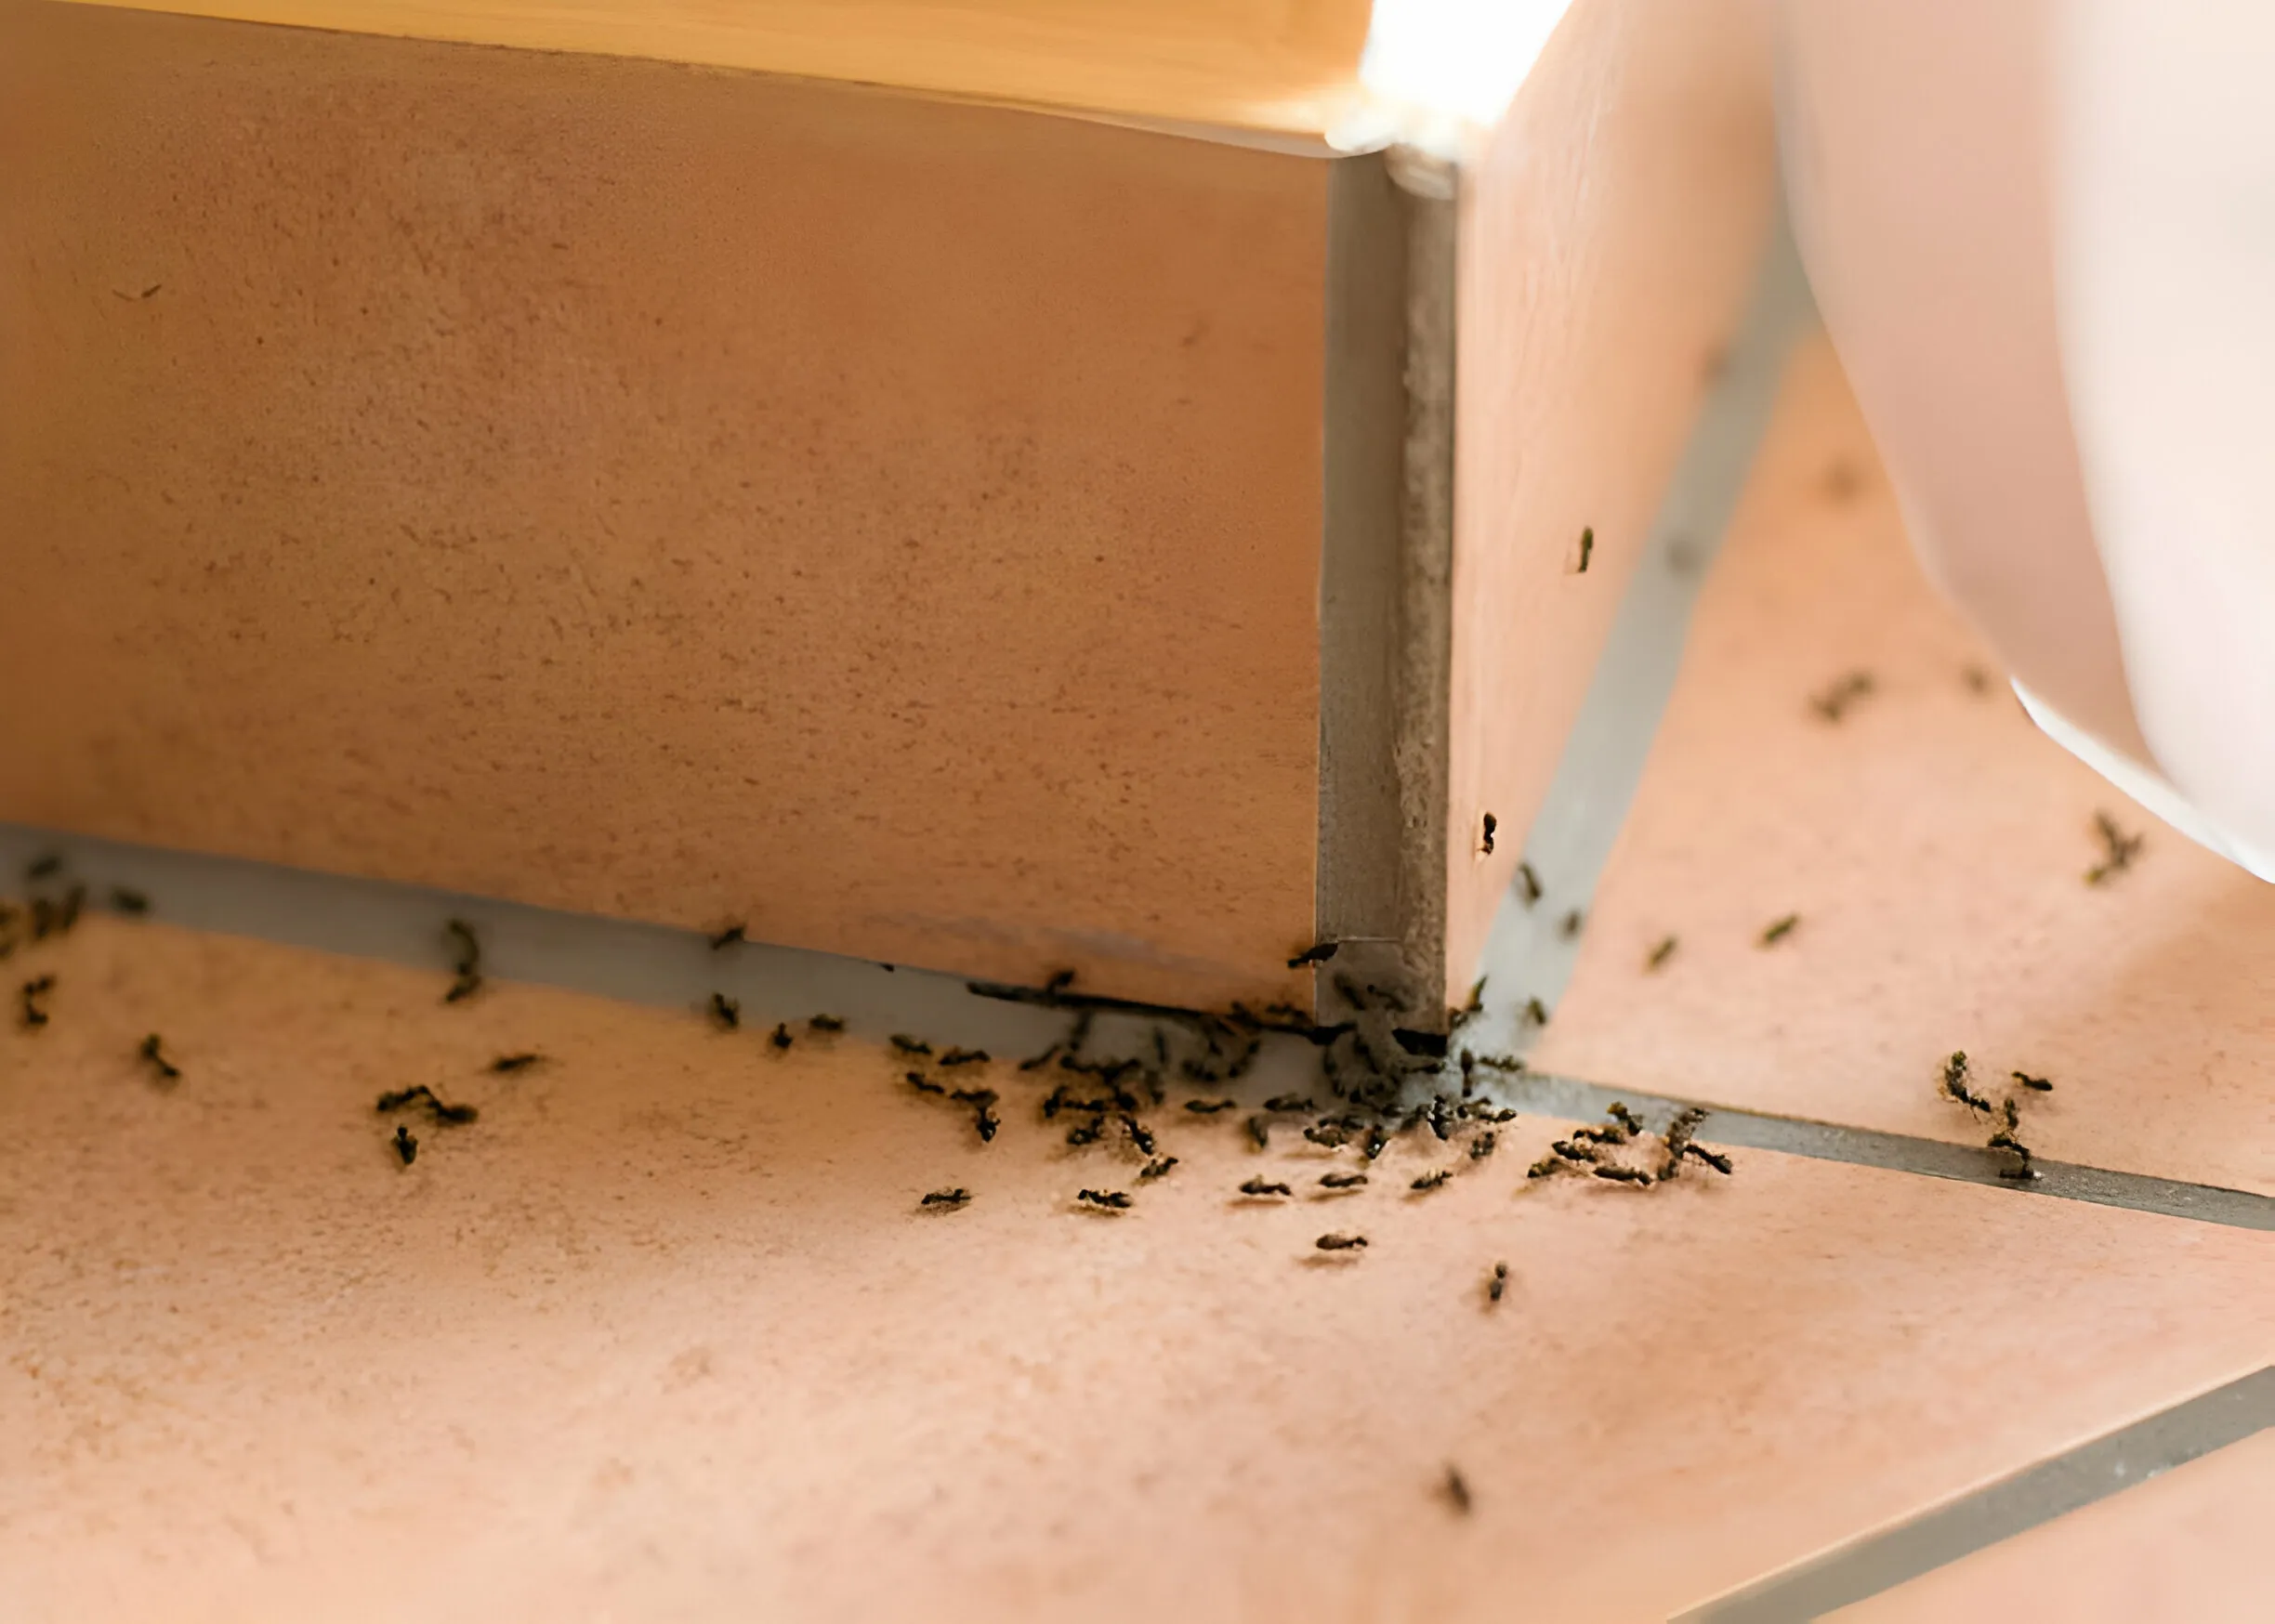 how to get rid of ants in house